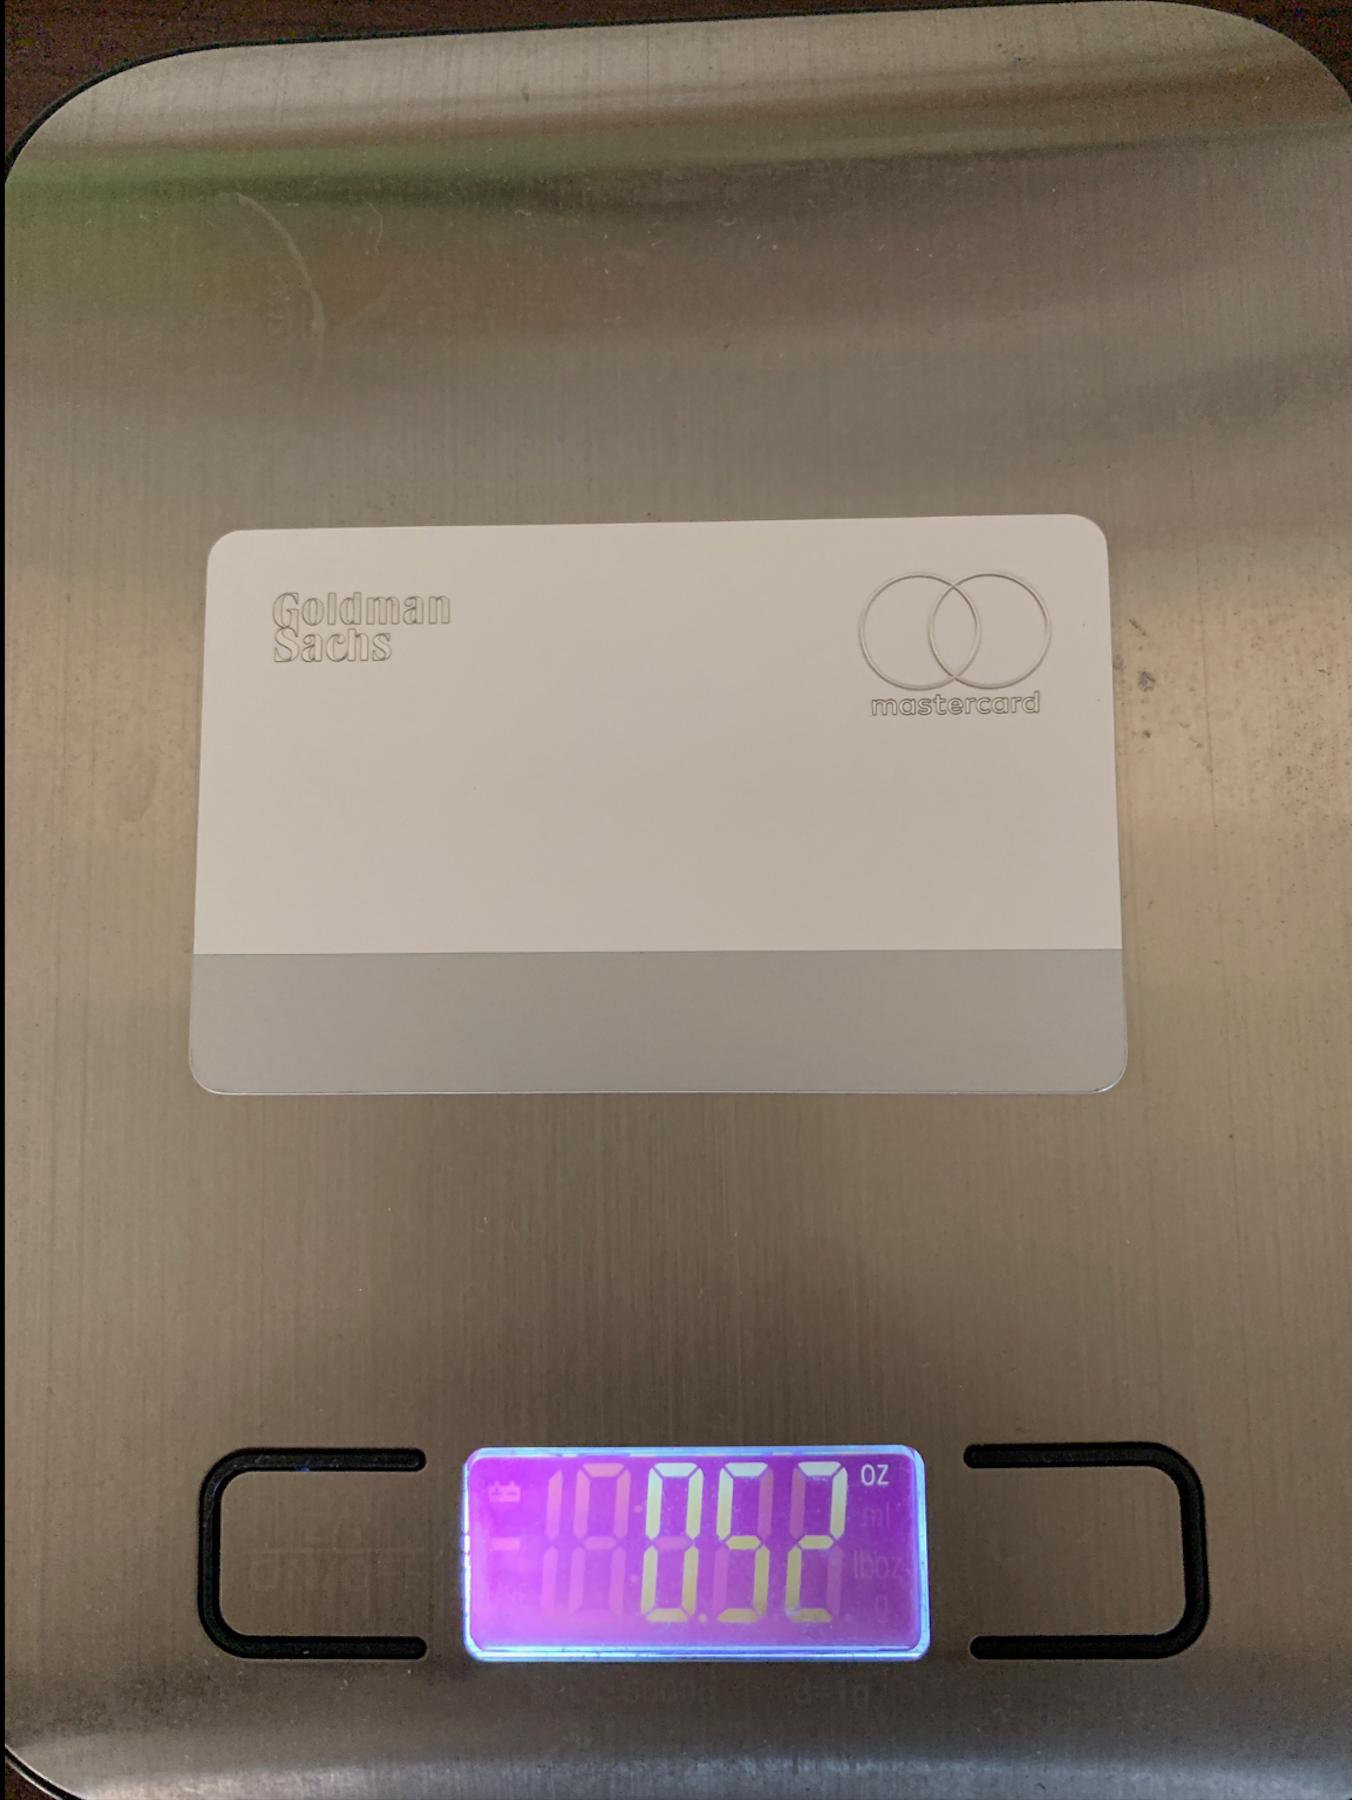 The Apple Card weighs .52 oz or 14.74 grams